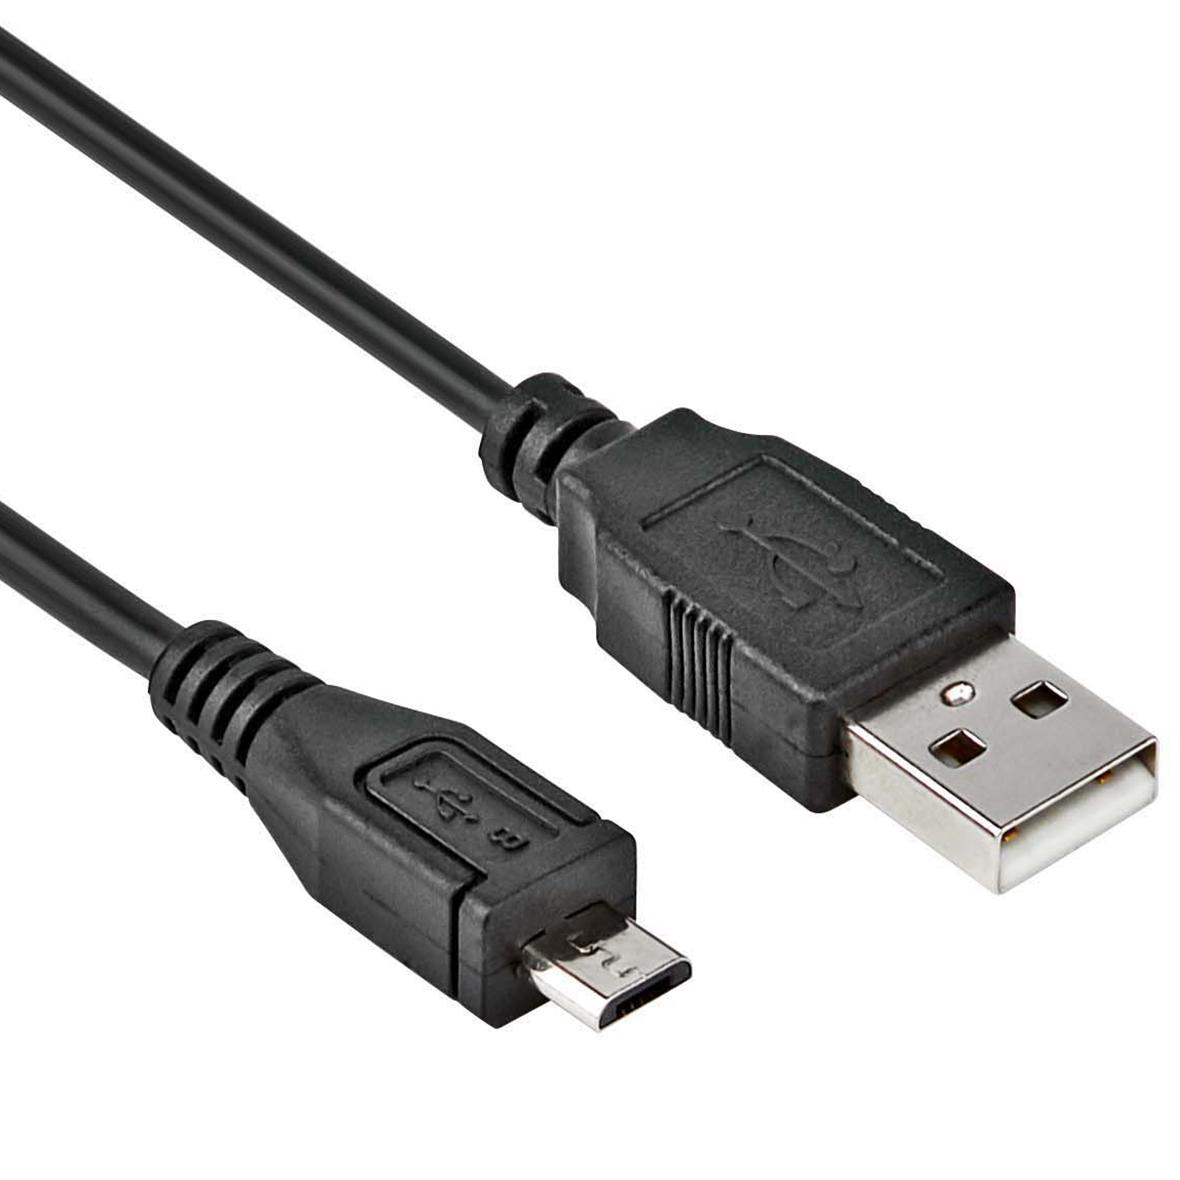 Sony Xperia Z5 Compact - USB Kabel - Allteq